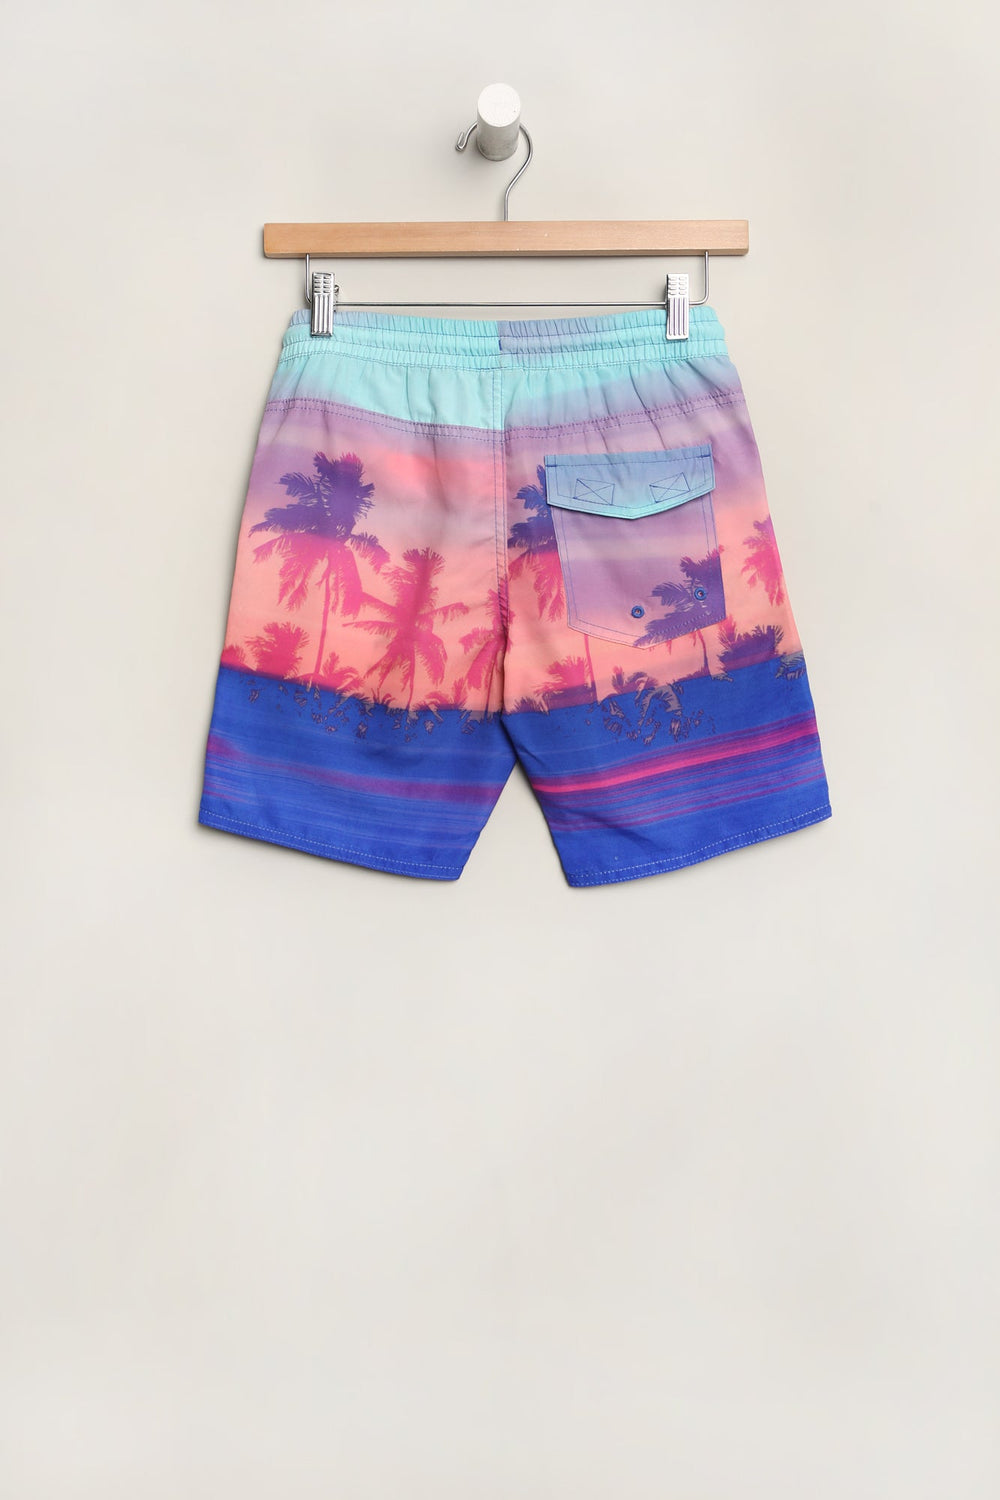 West49 Youth Sunset Print Beach Shorts West49 Youth Sunset Print Beach Shorts